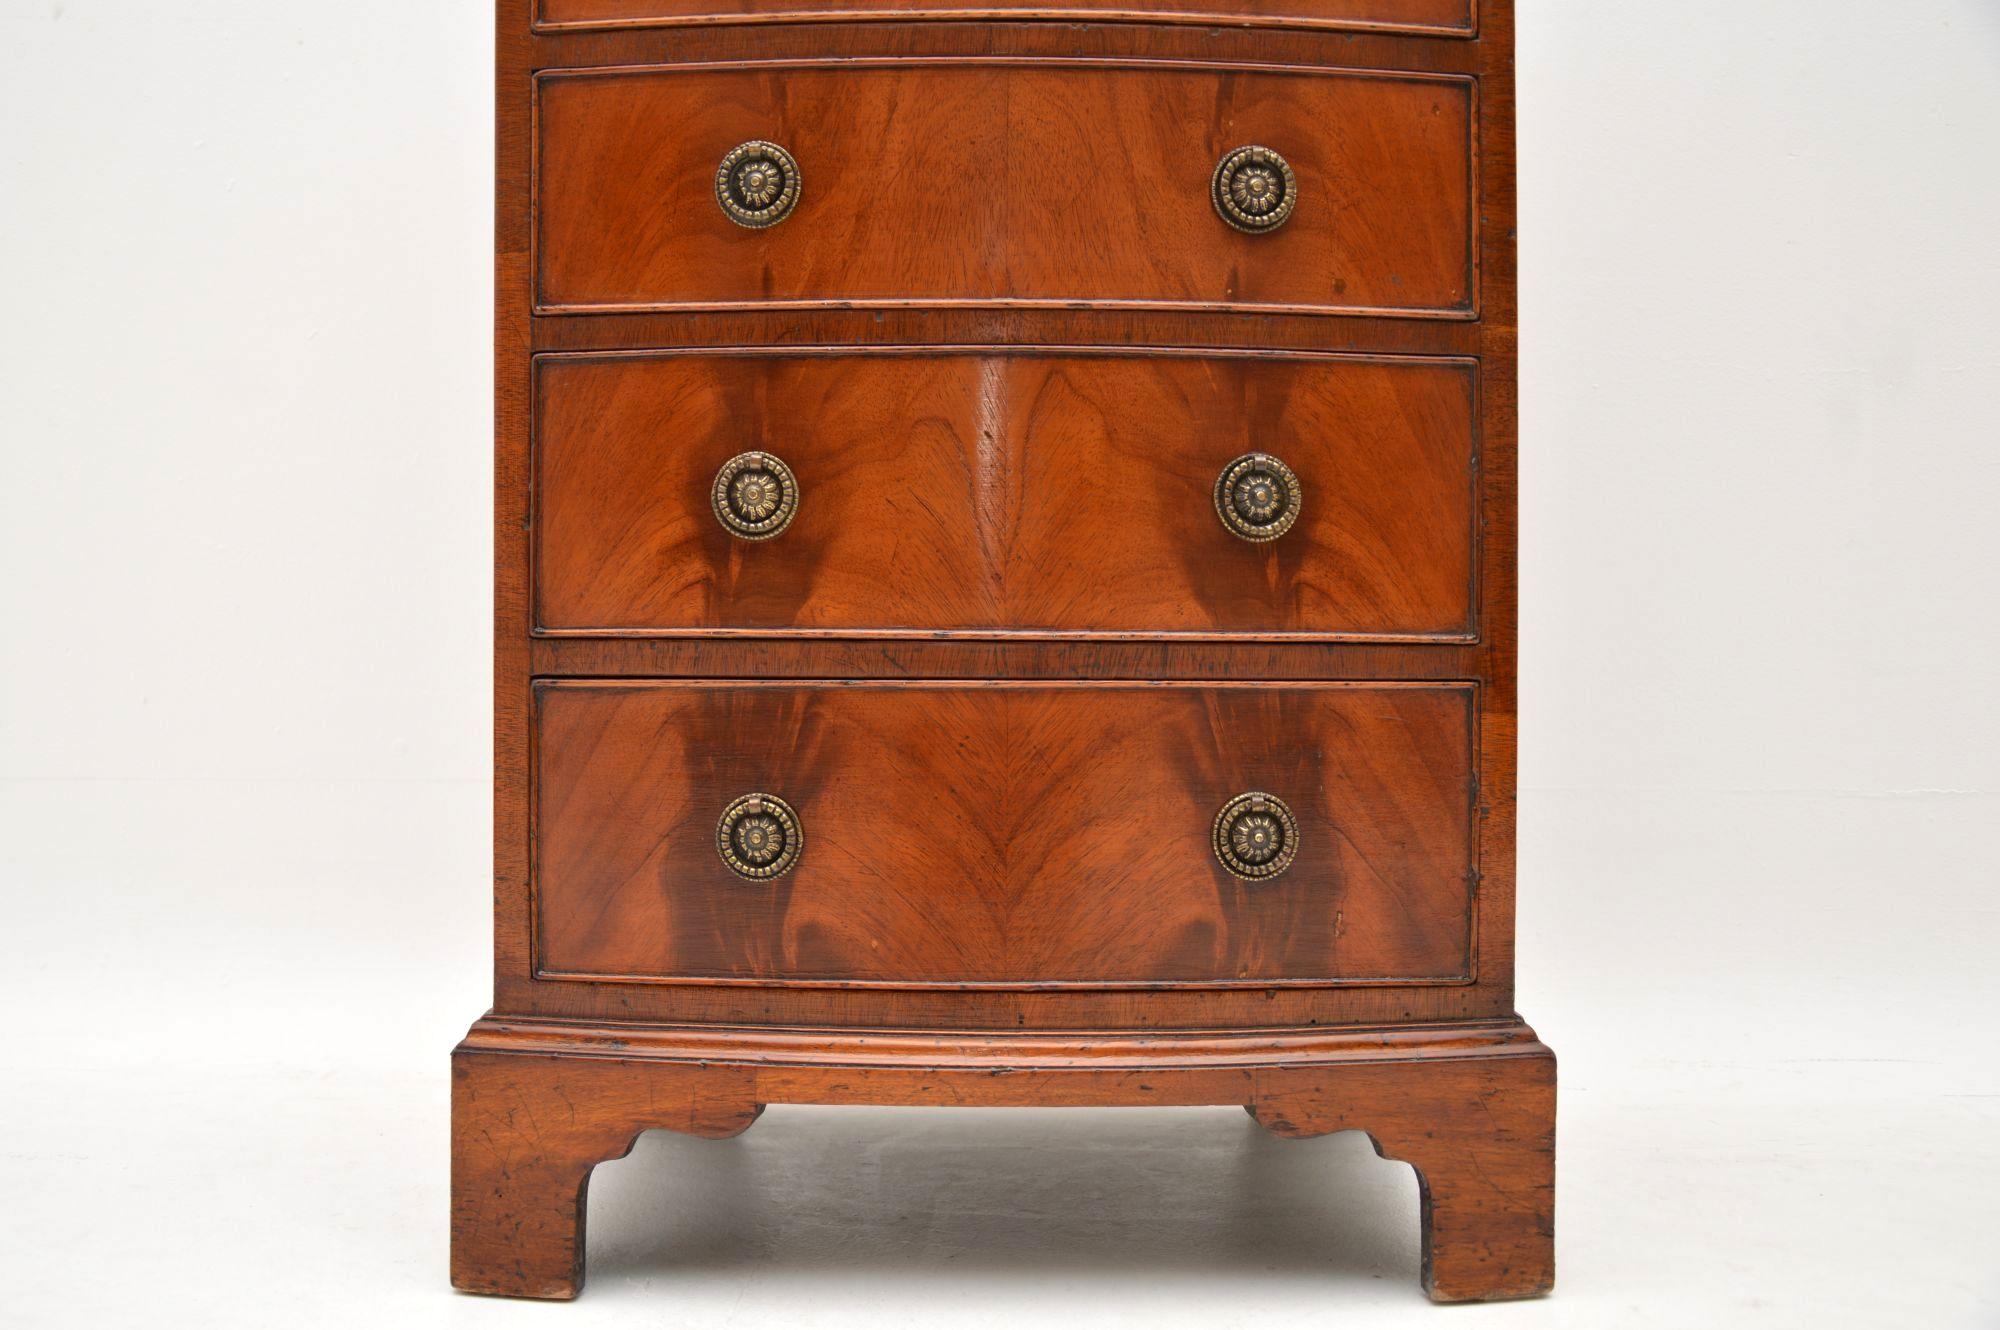 English Slim Antique Edwardian Bow Fronted Mahogany Chest of Drawers